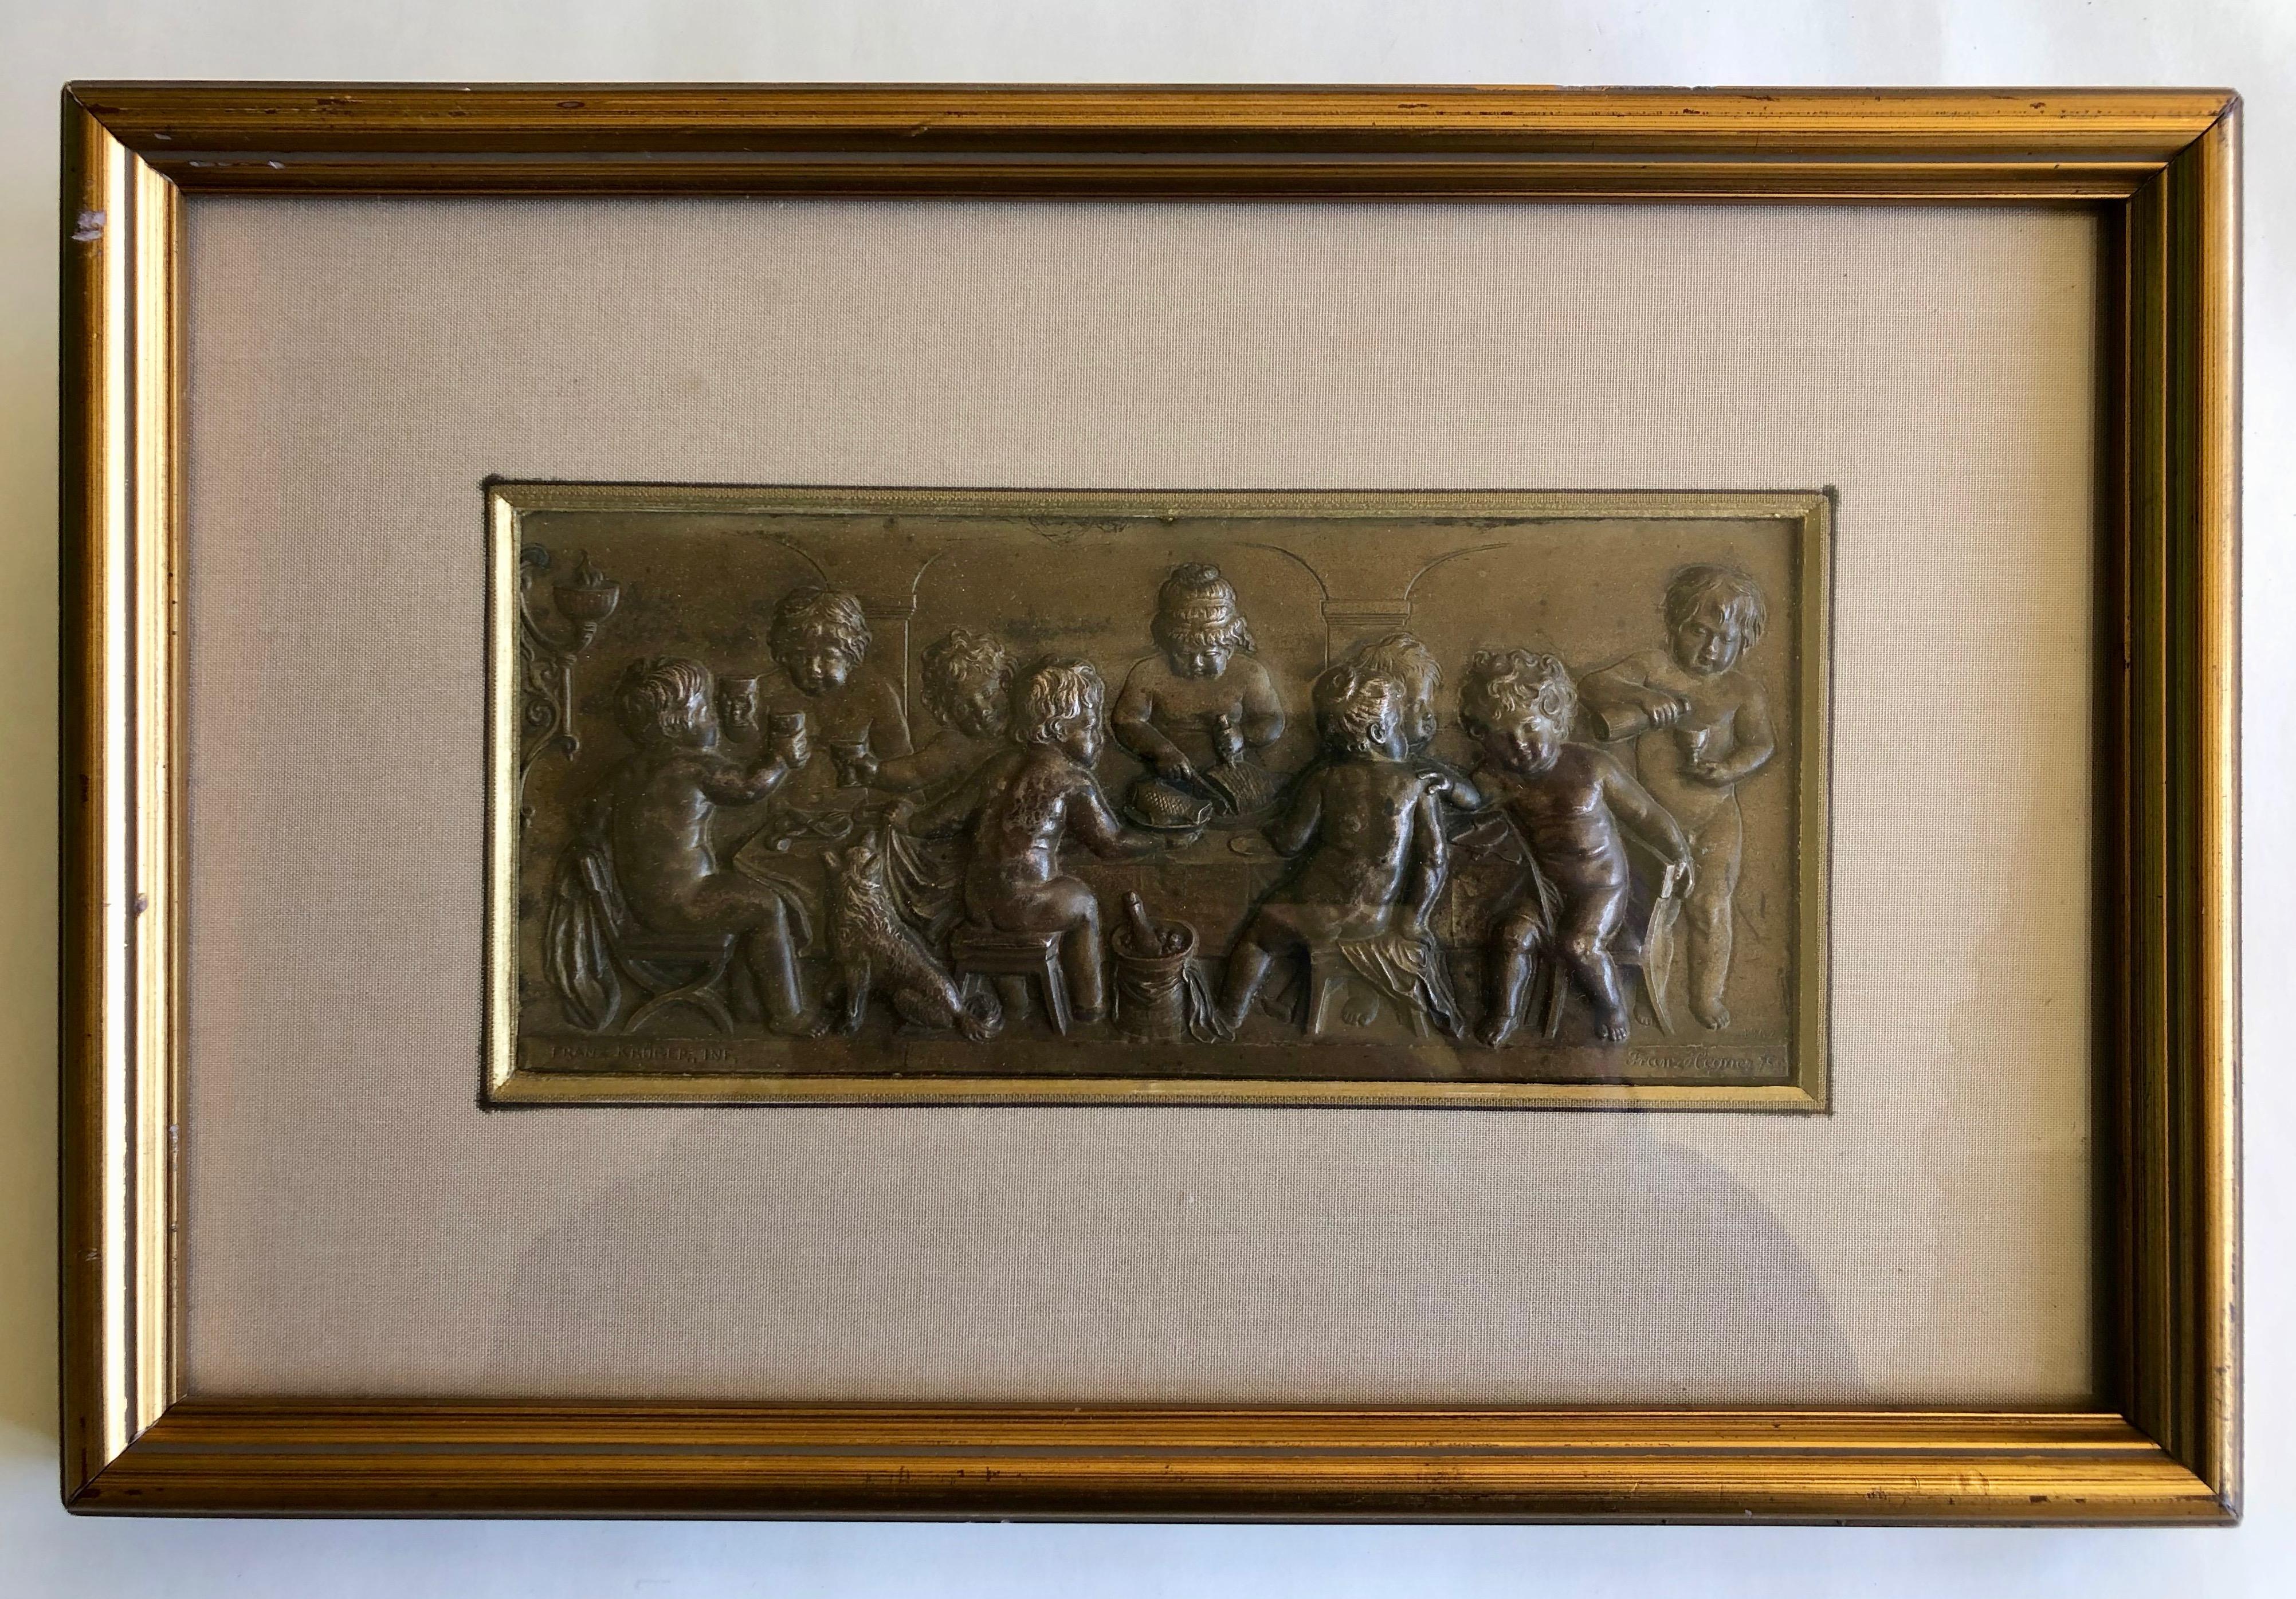 Franz Krüger Nude Sculpture - Framed Embossed Bronze Of 9 Cherubs Dining With A Dog, Signed And Dated 1902